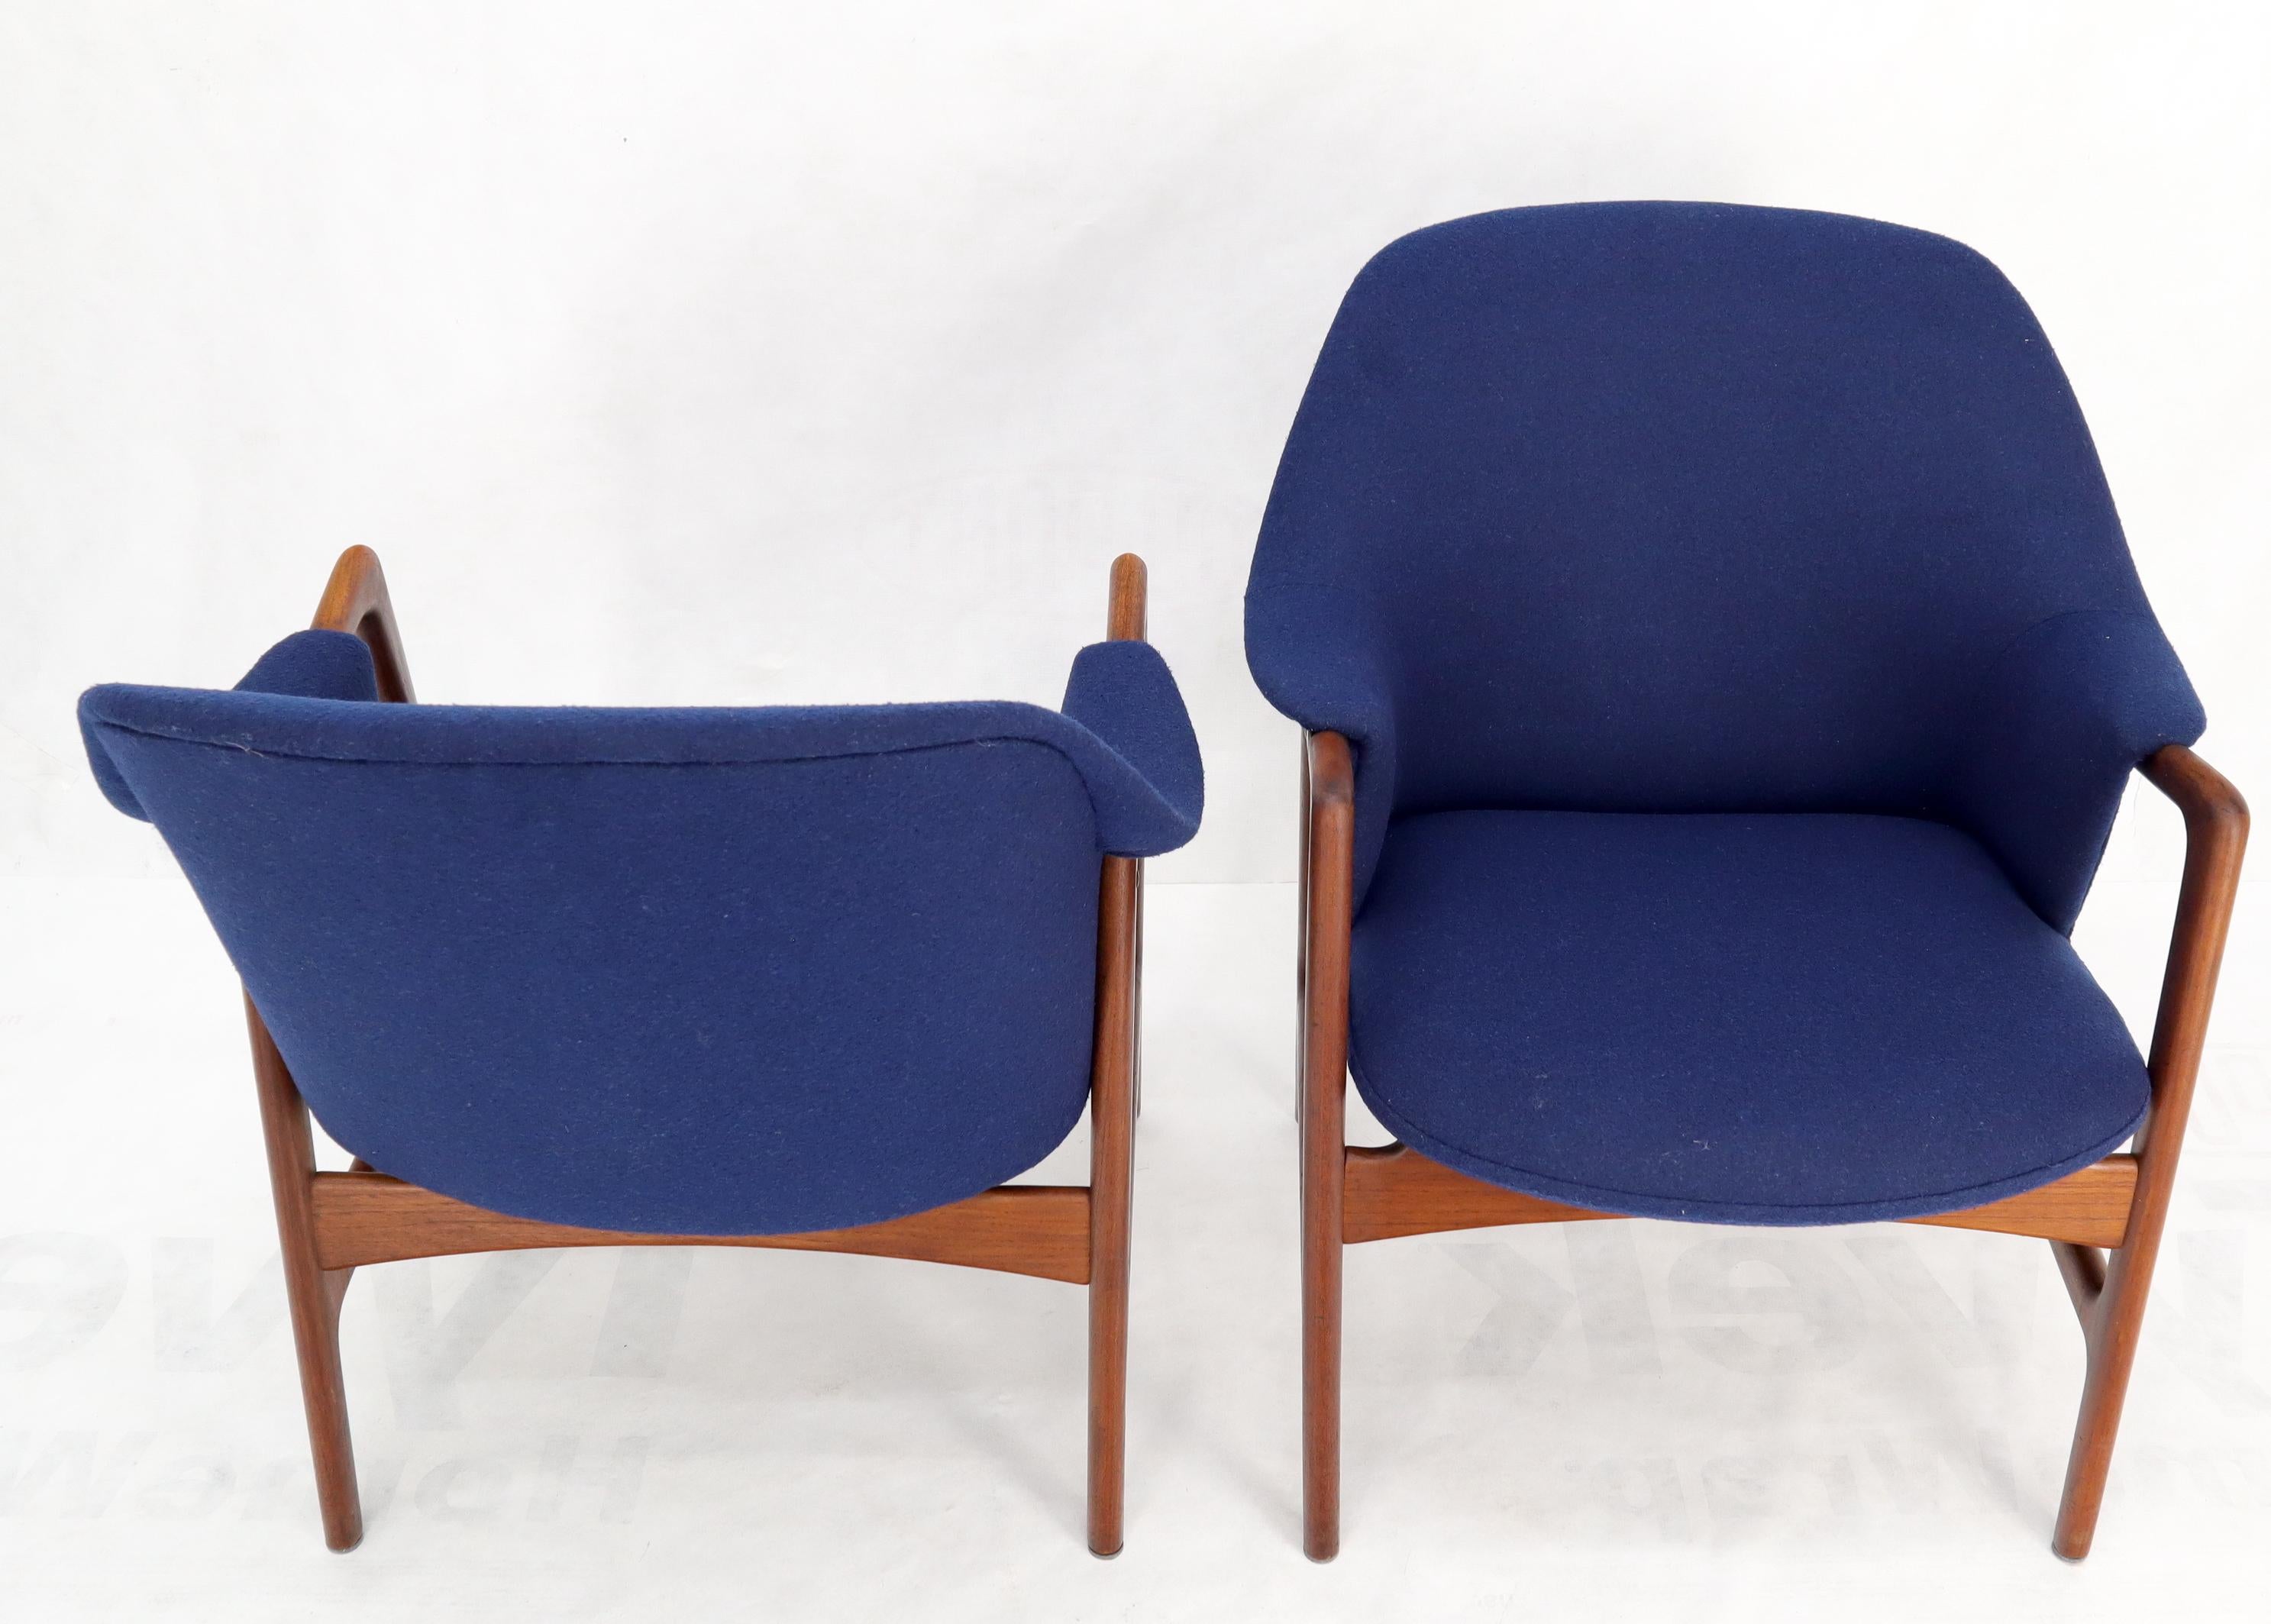 New Blue Wool Upholstery Teak Frames Danish Mid-Century Modern Lounge Chairs For Sale 8